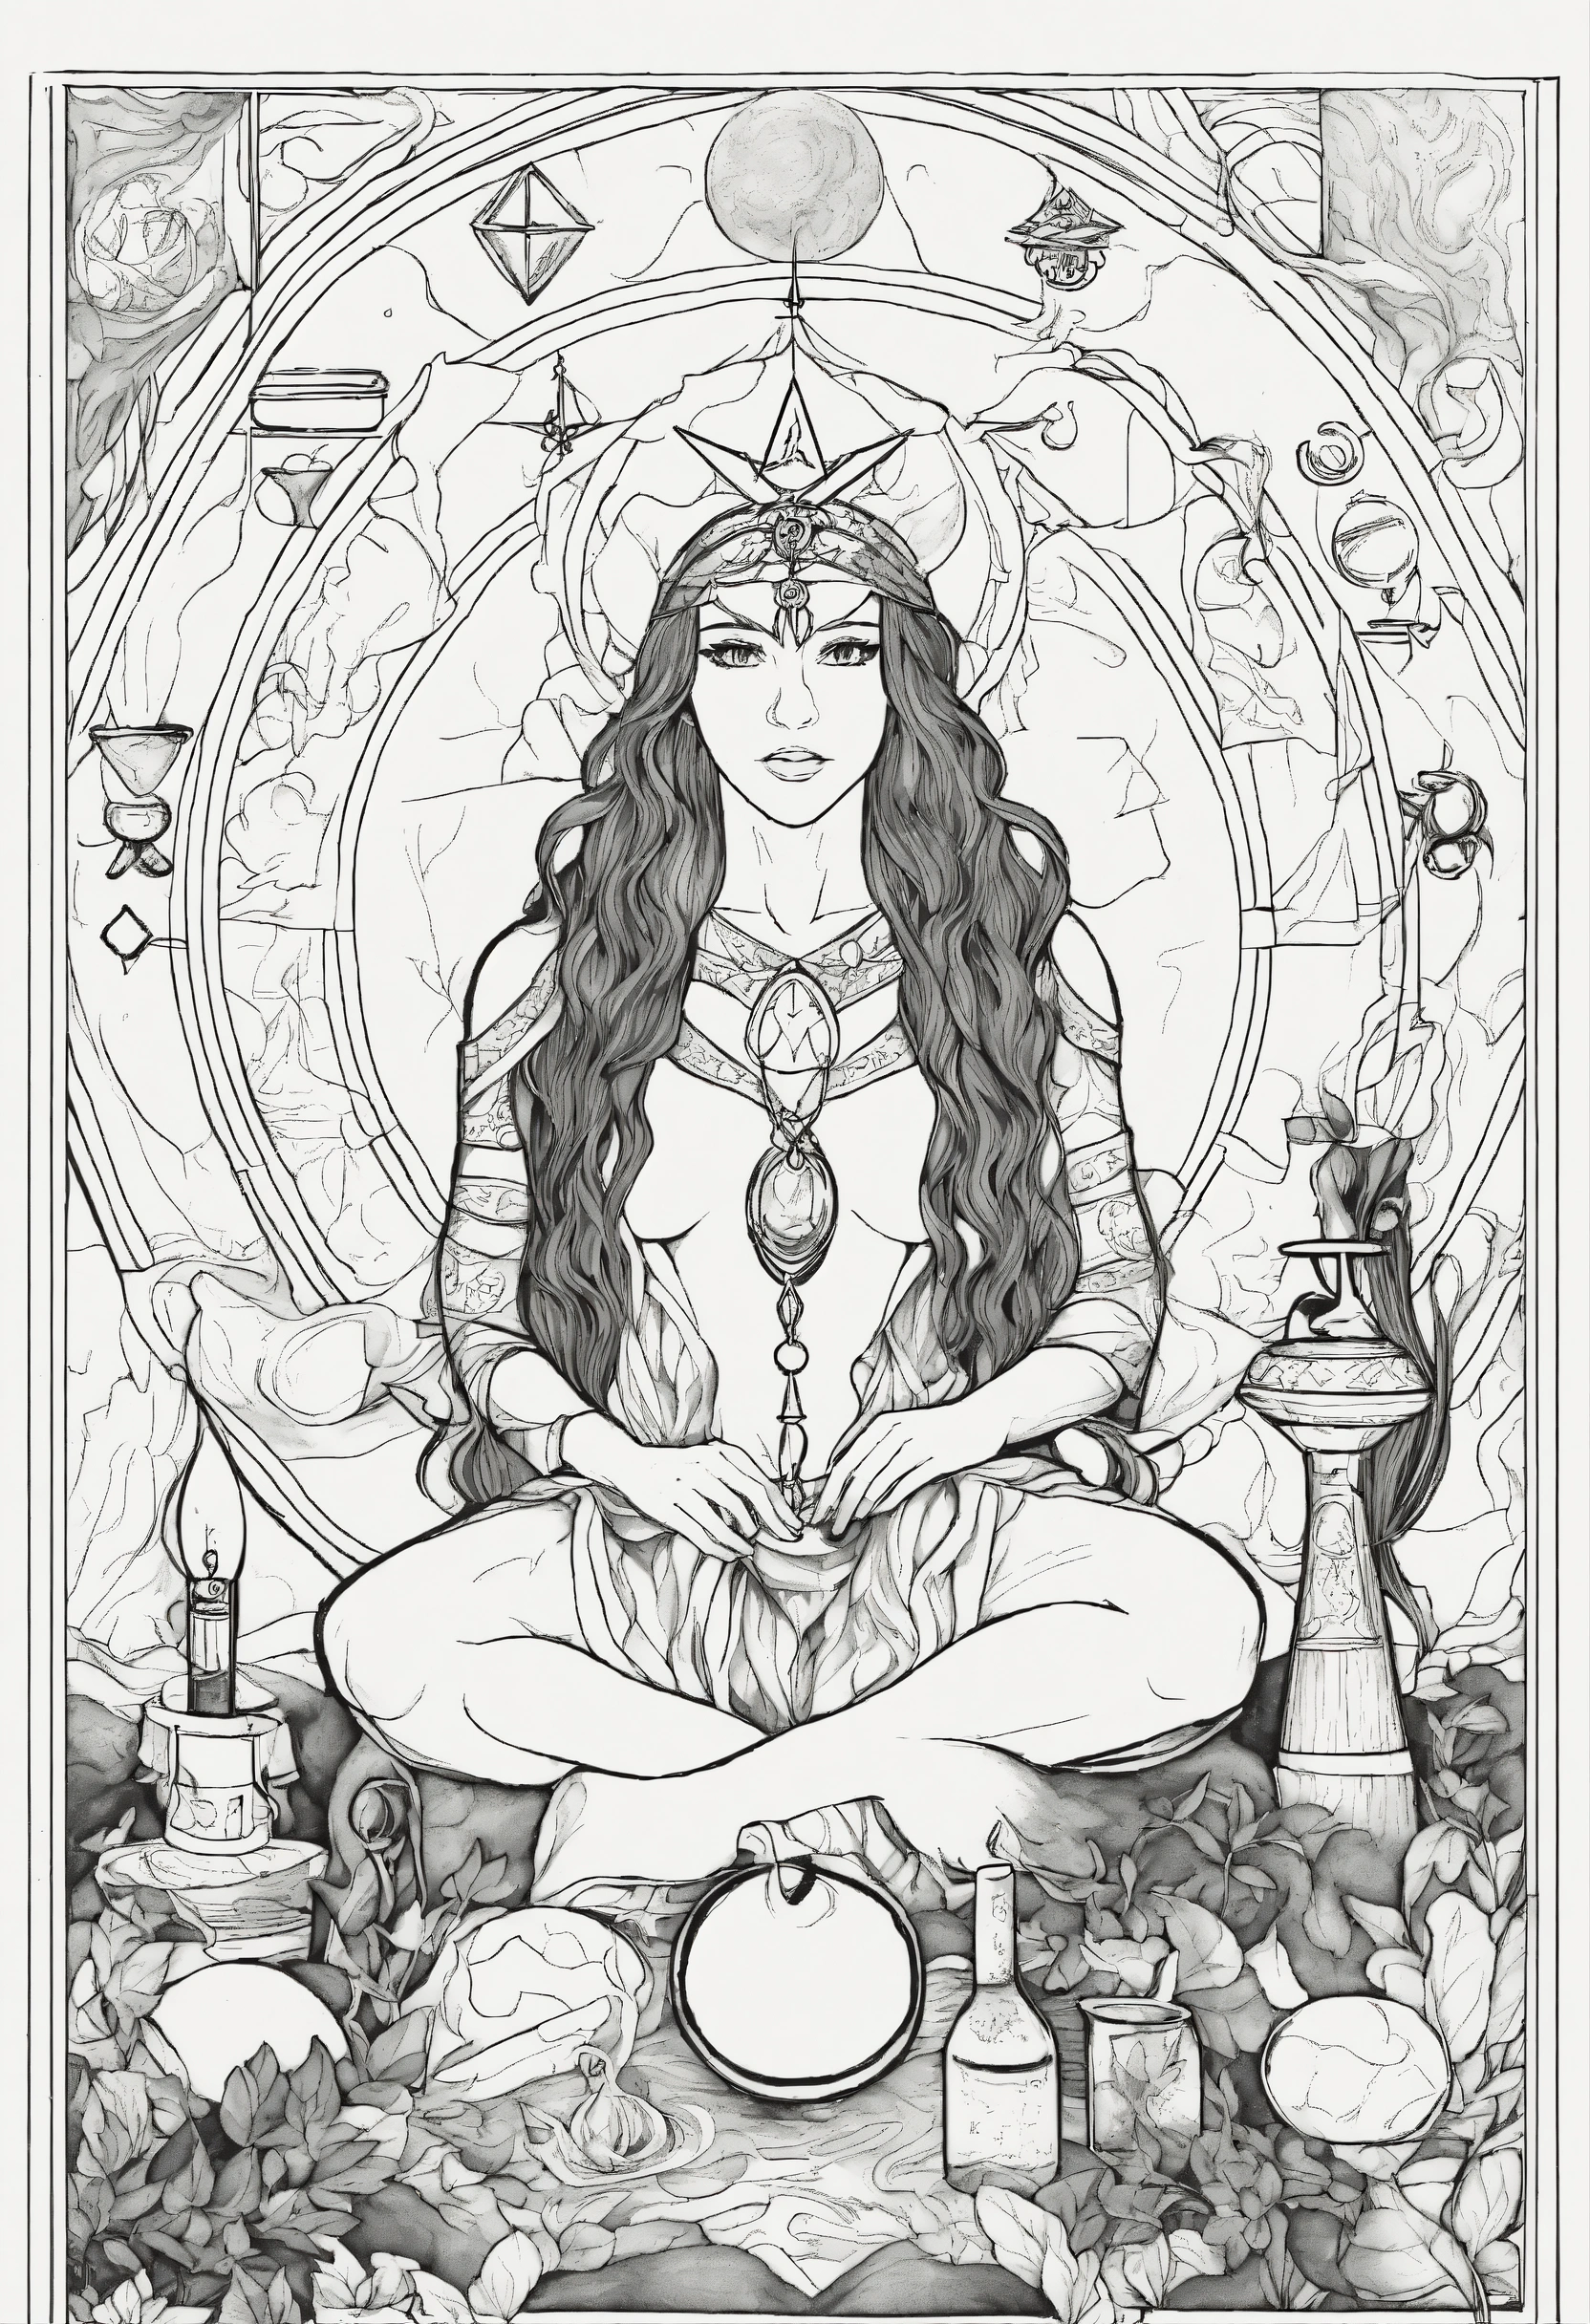 Lexica - Simple adult coloring book page featuring a witchy pagan